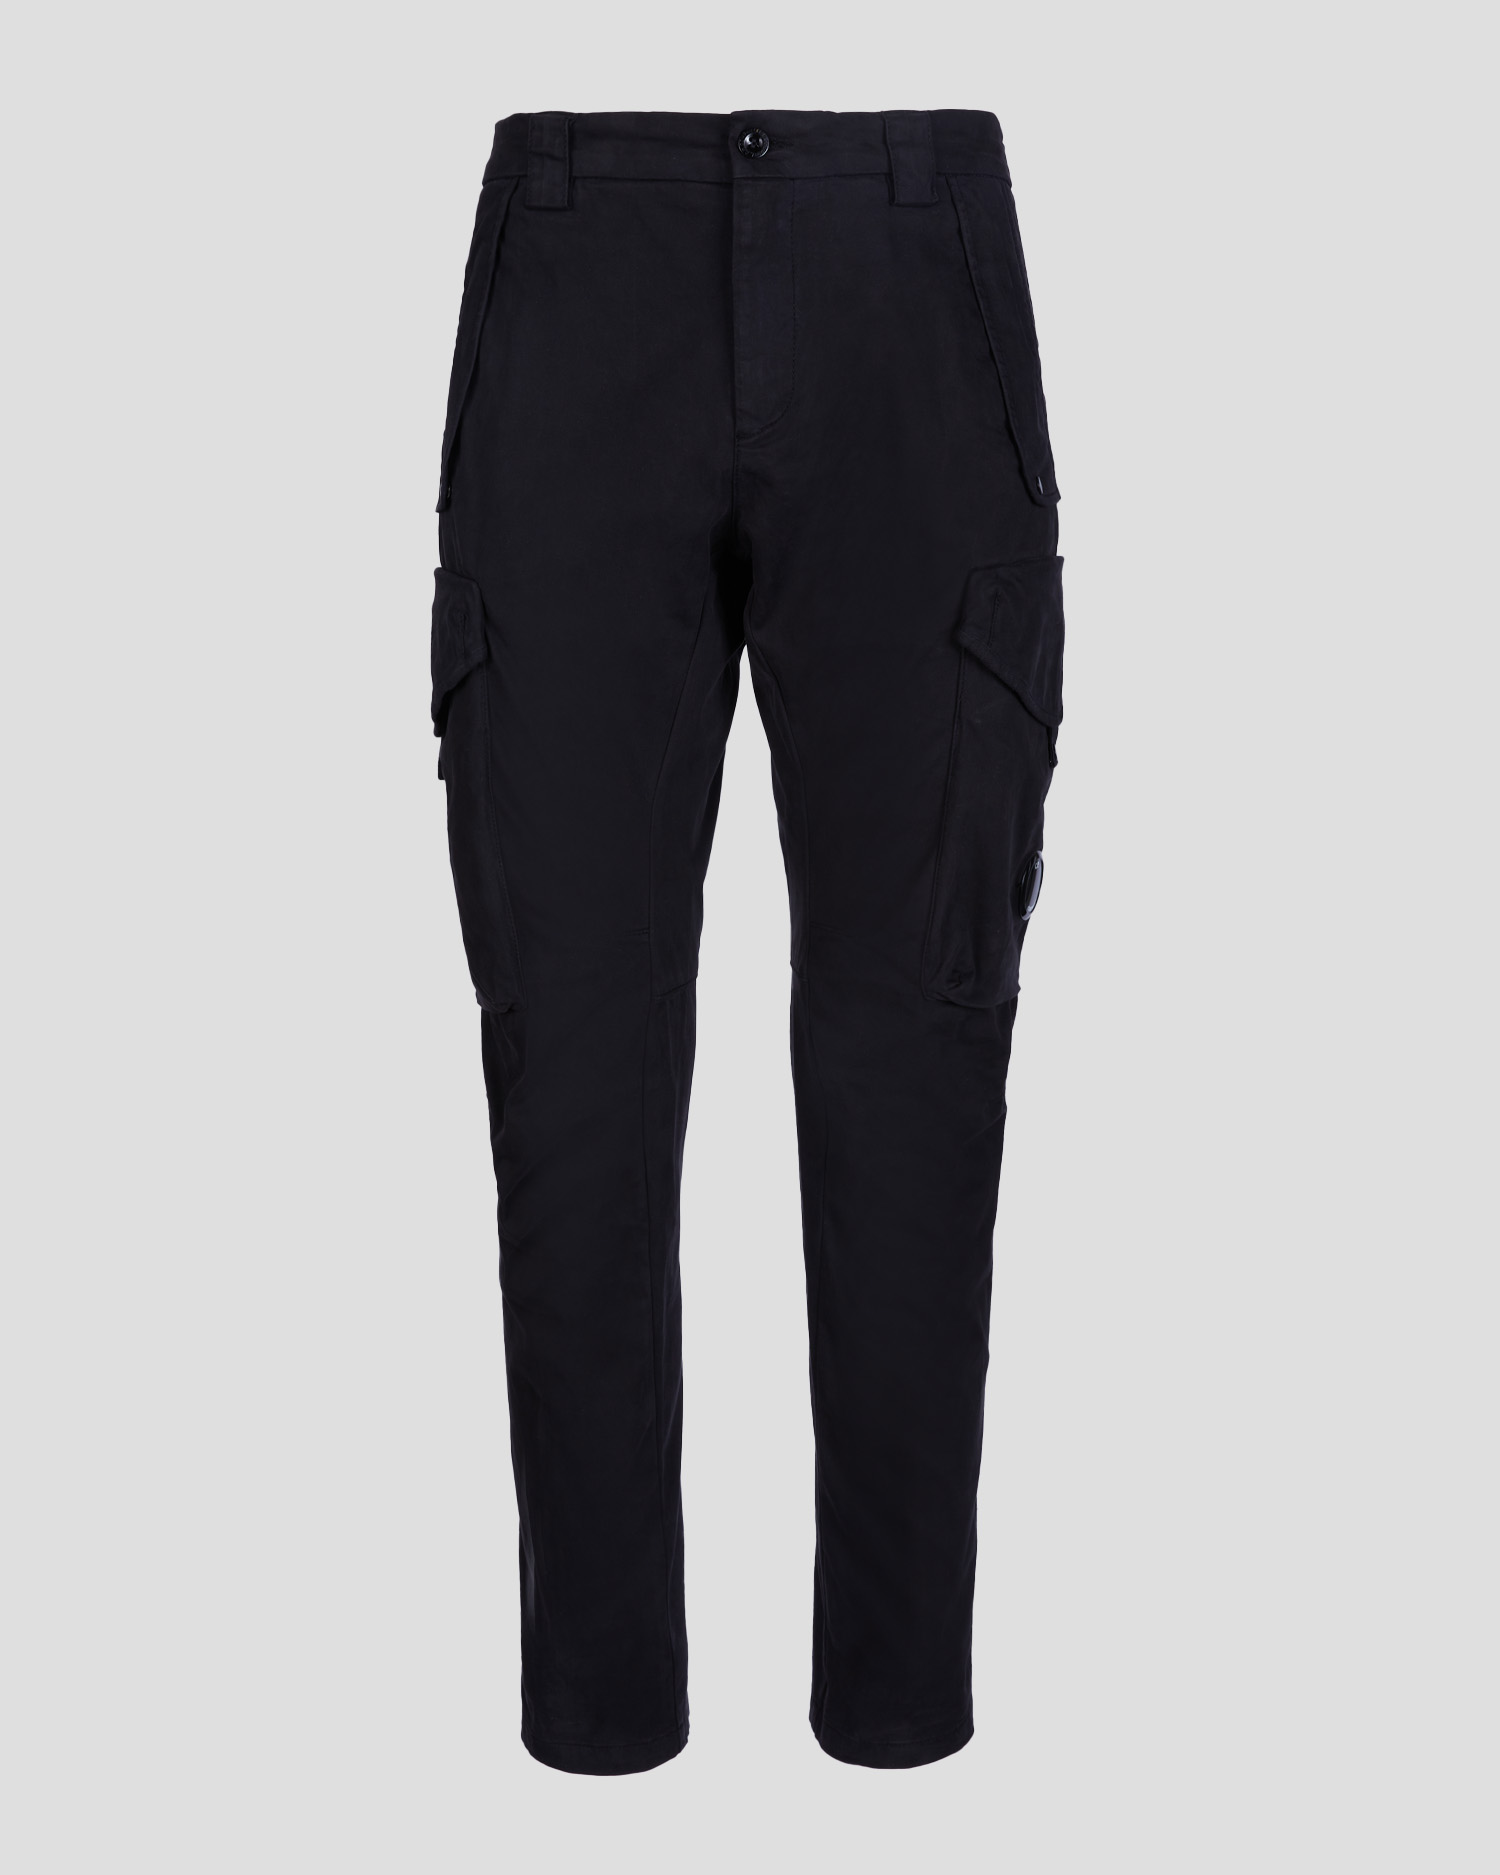 Stretch Sateen Workwear Pants | C.P. Company Online Store